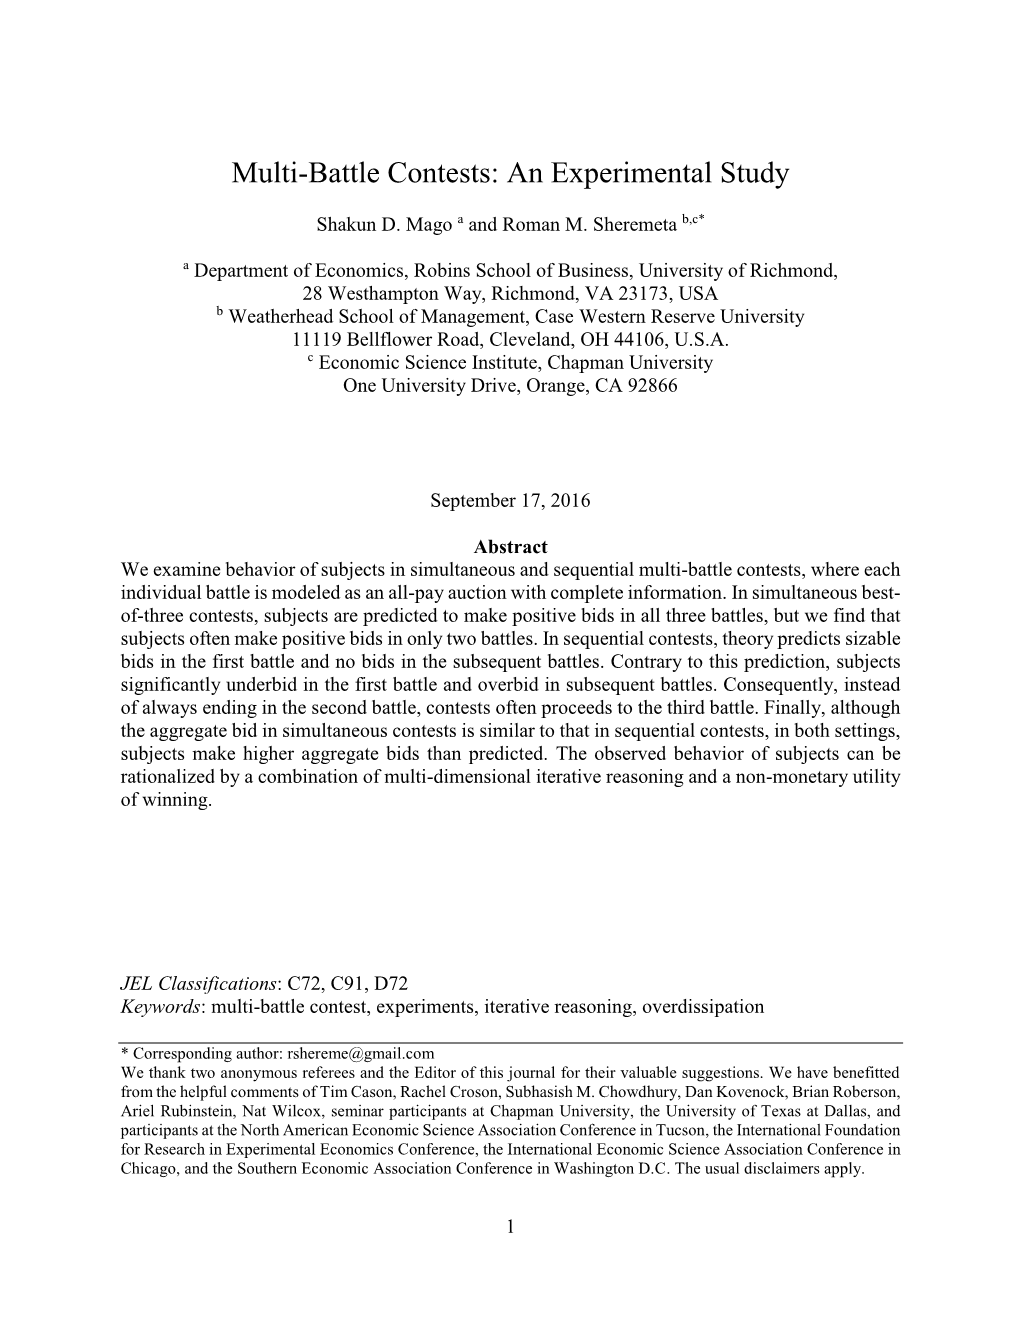 Multi-Battle Contests: an Experimental Study